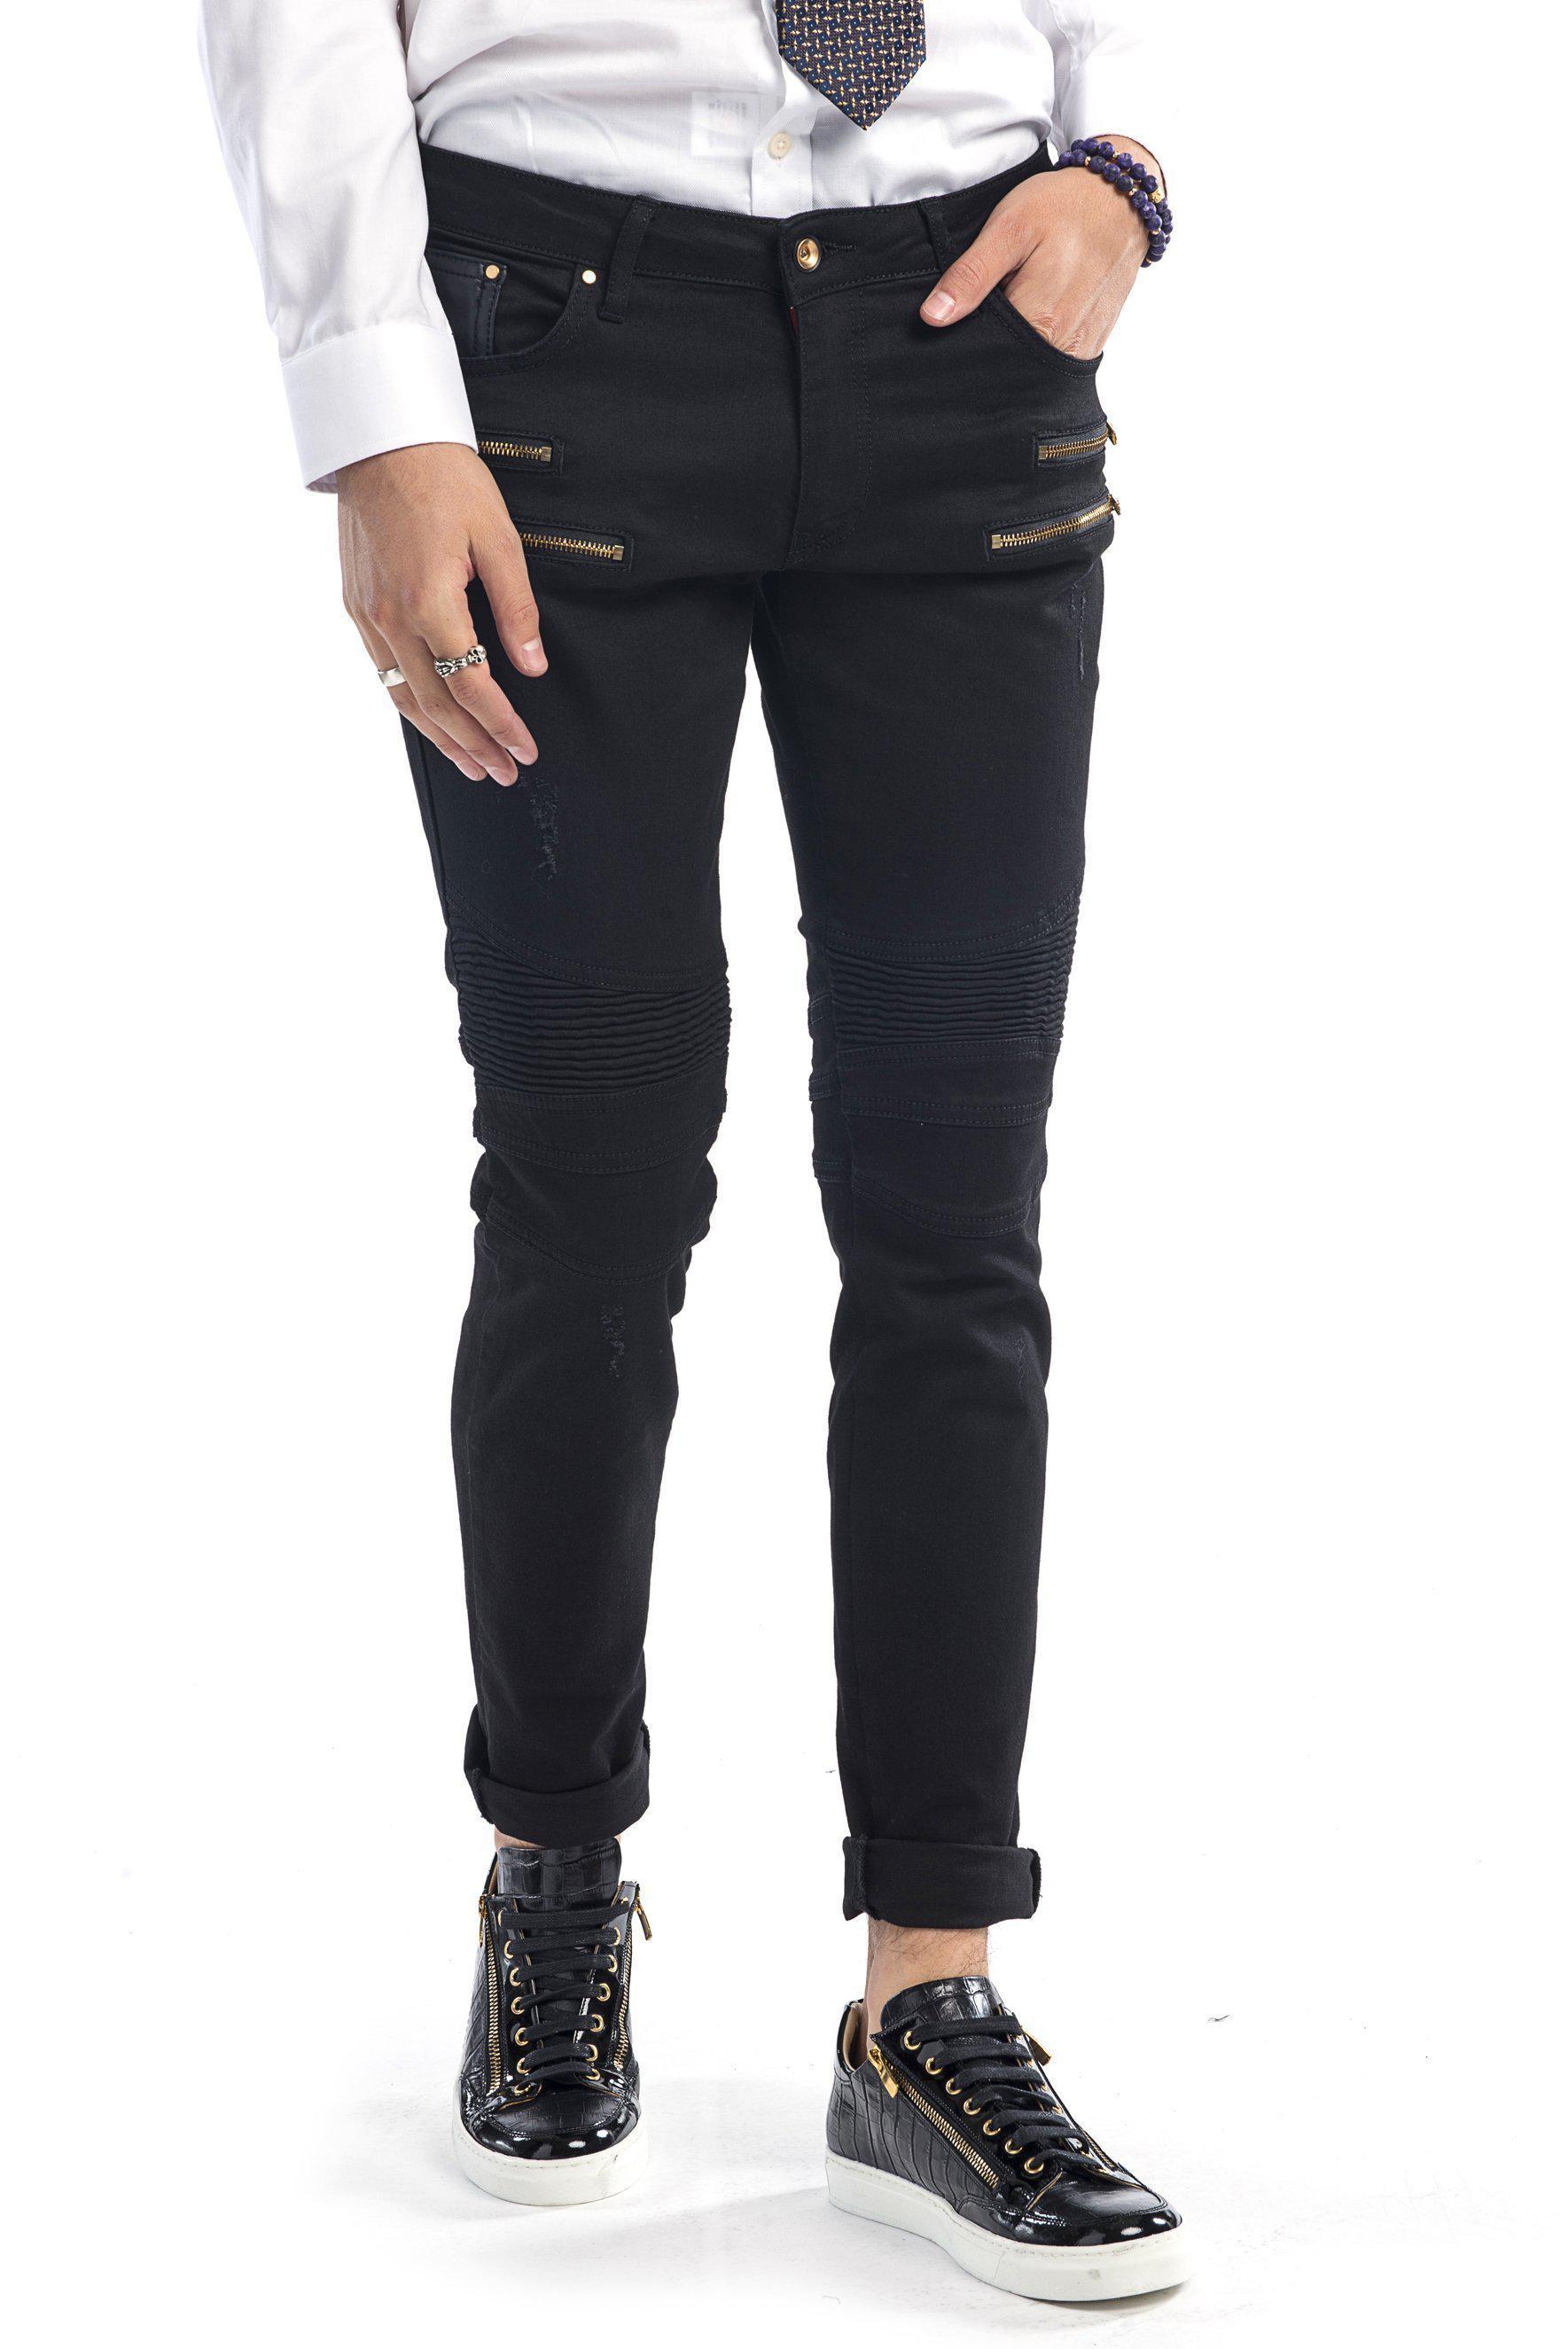 black jeans with gold zippers